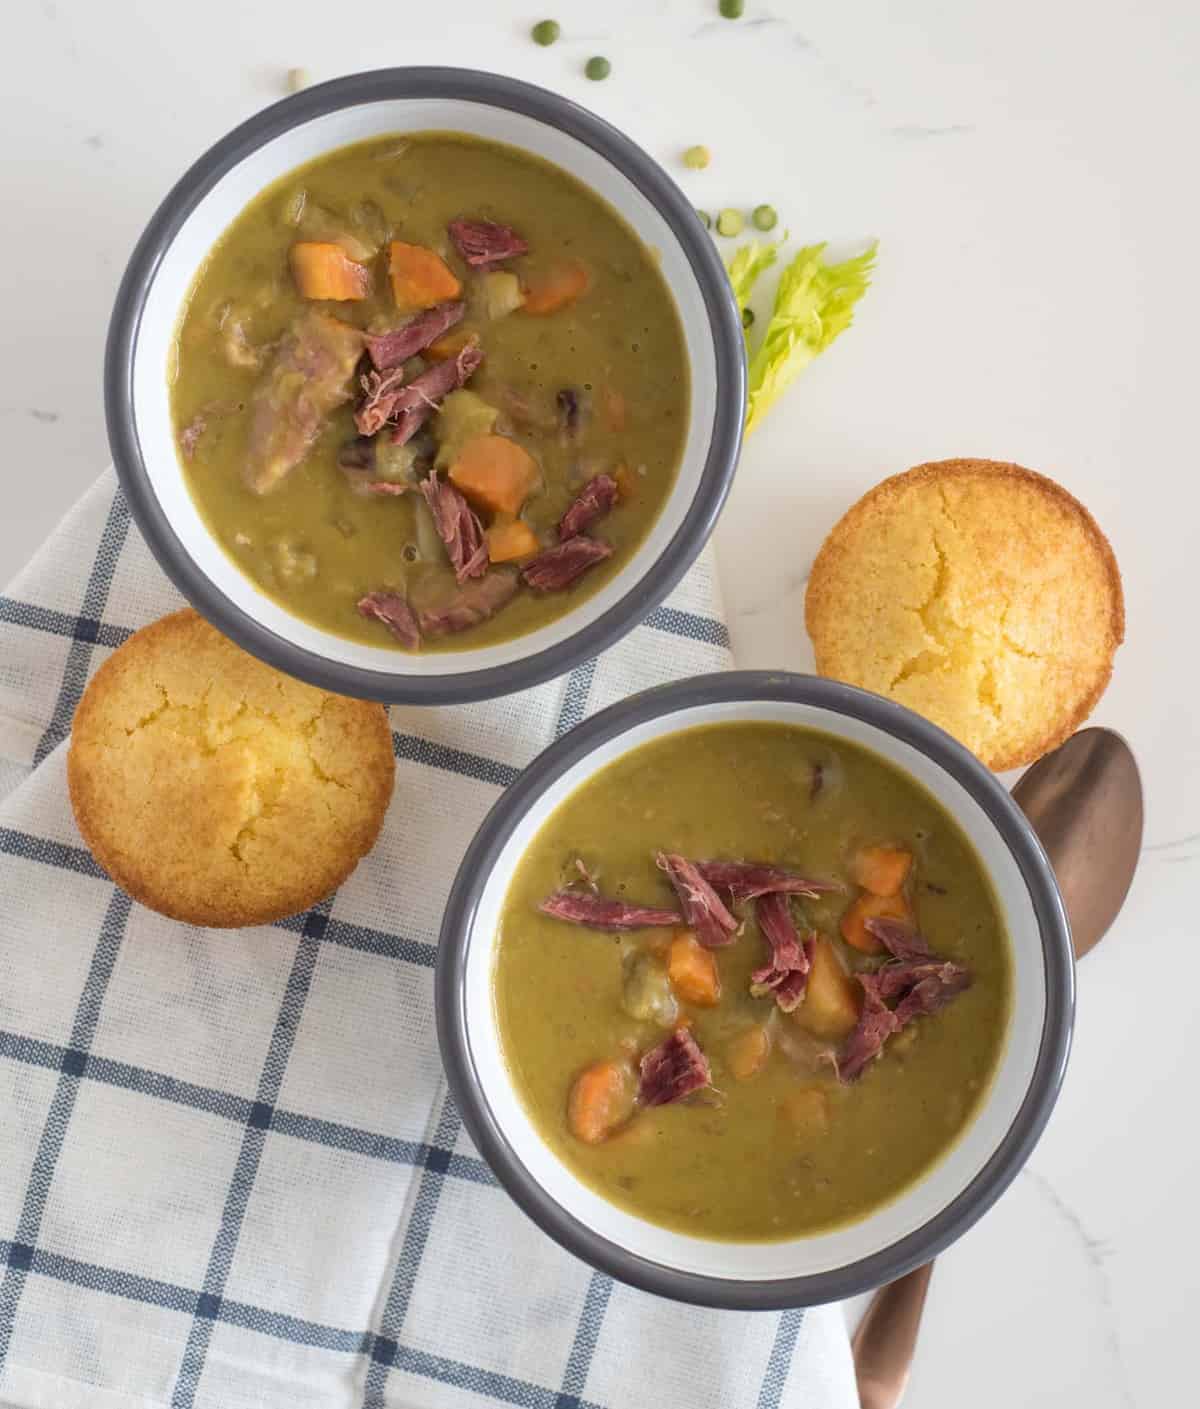 Quick and easy Instant Pot Split Pea Soup made with just a few ingredients and done in about 4o minutes start to finish.